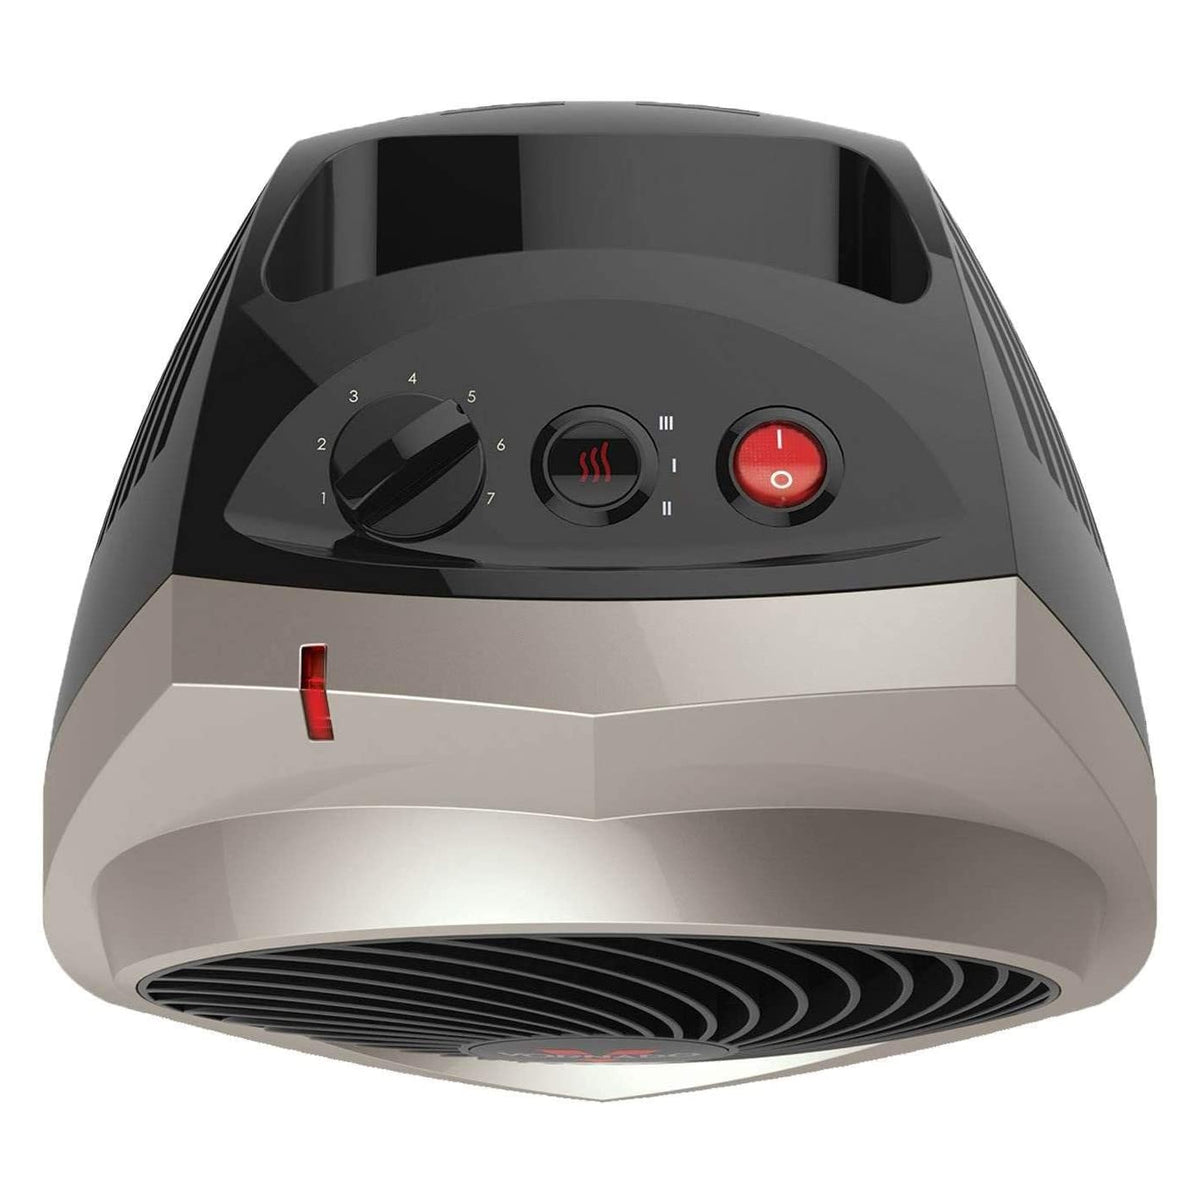 Vornado EH1-0092-69 Vortex Whole Room Electric Portable Heater with 3 Settings, VH200